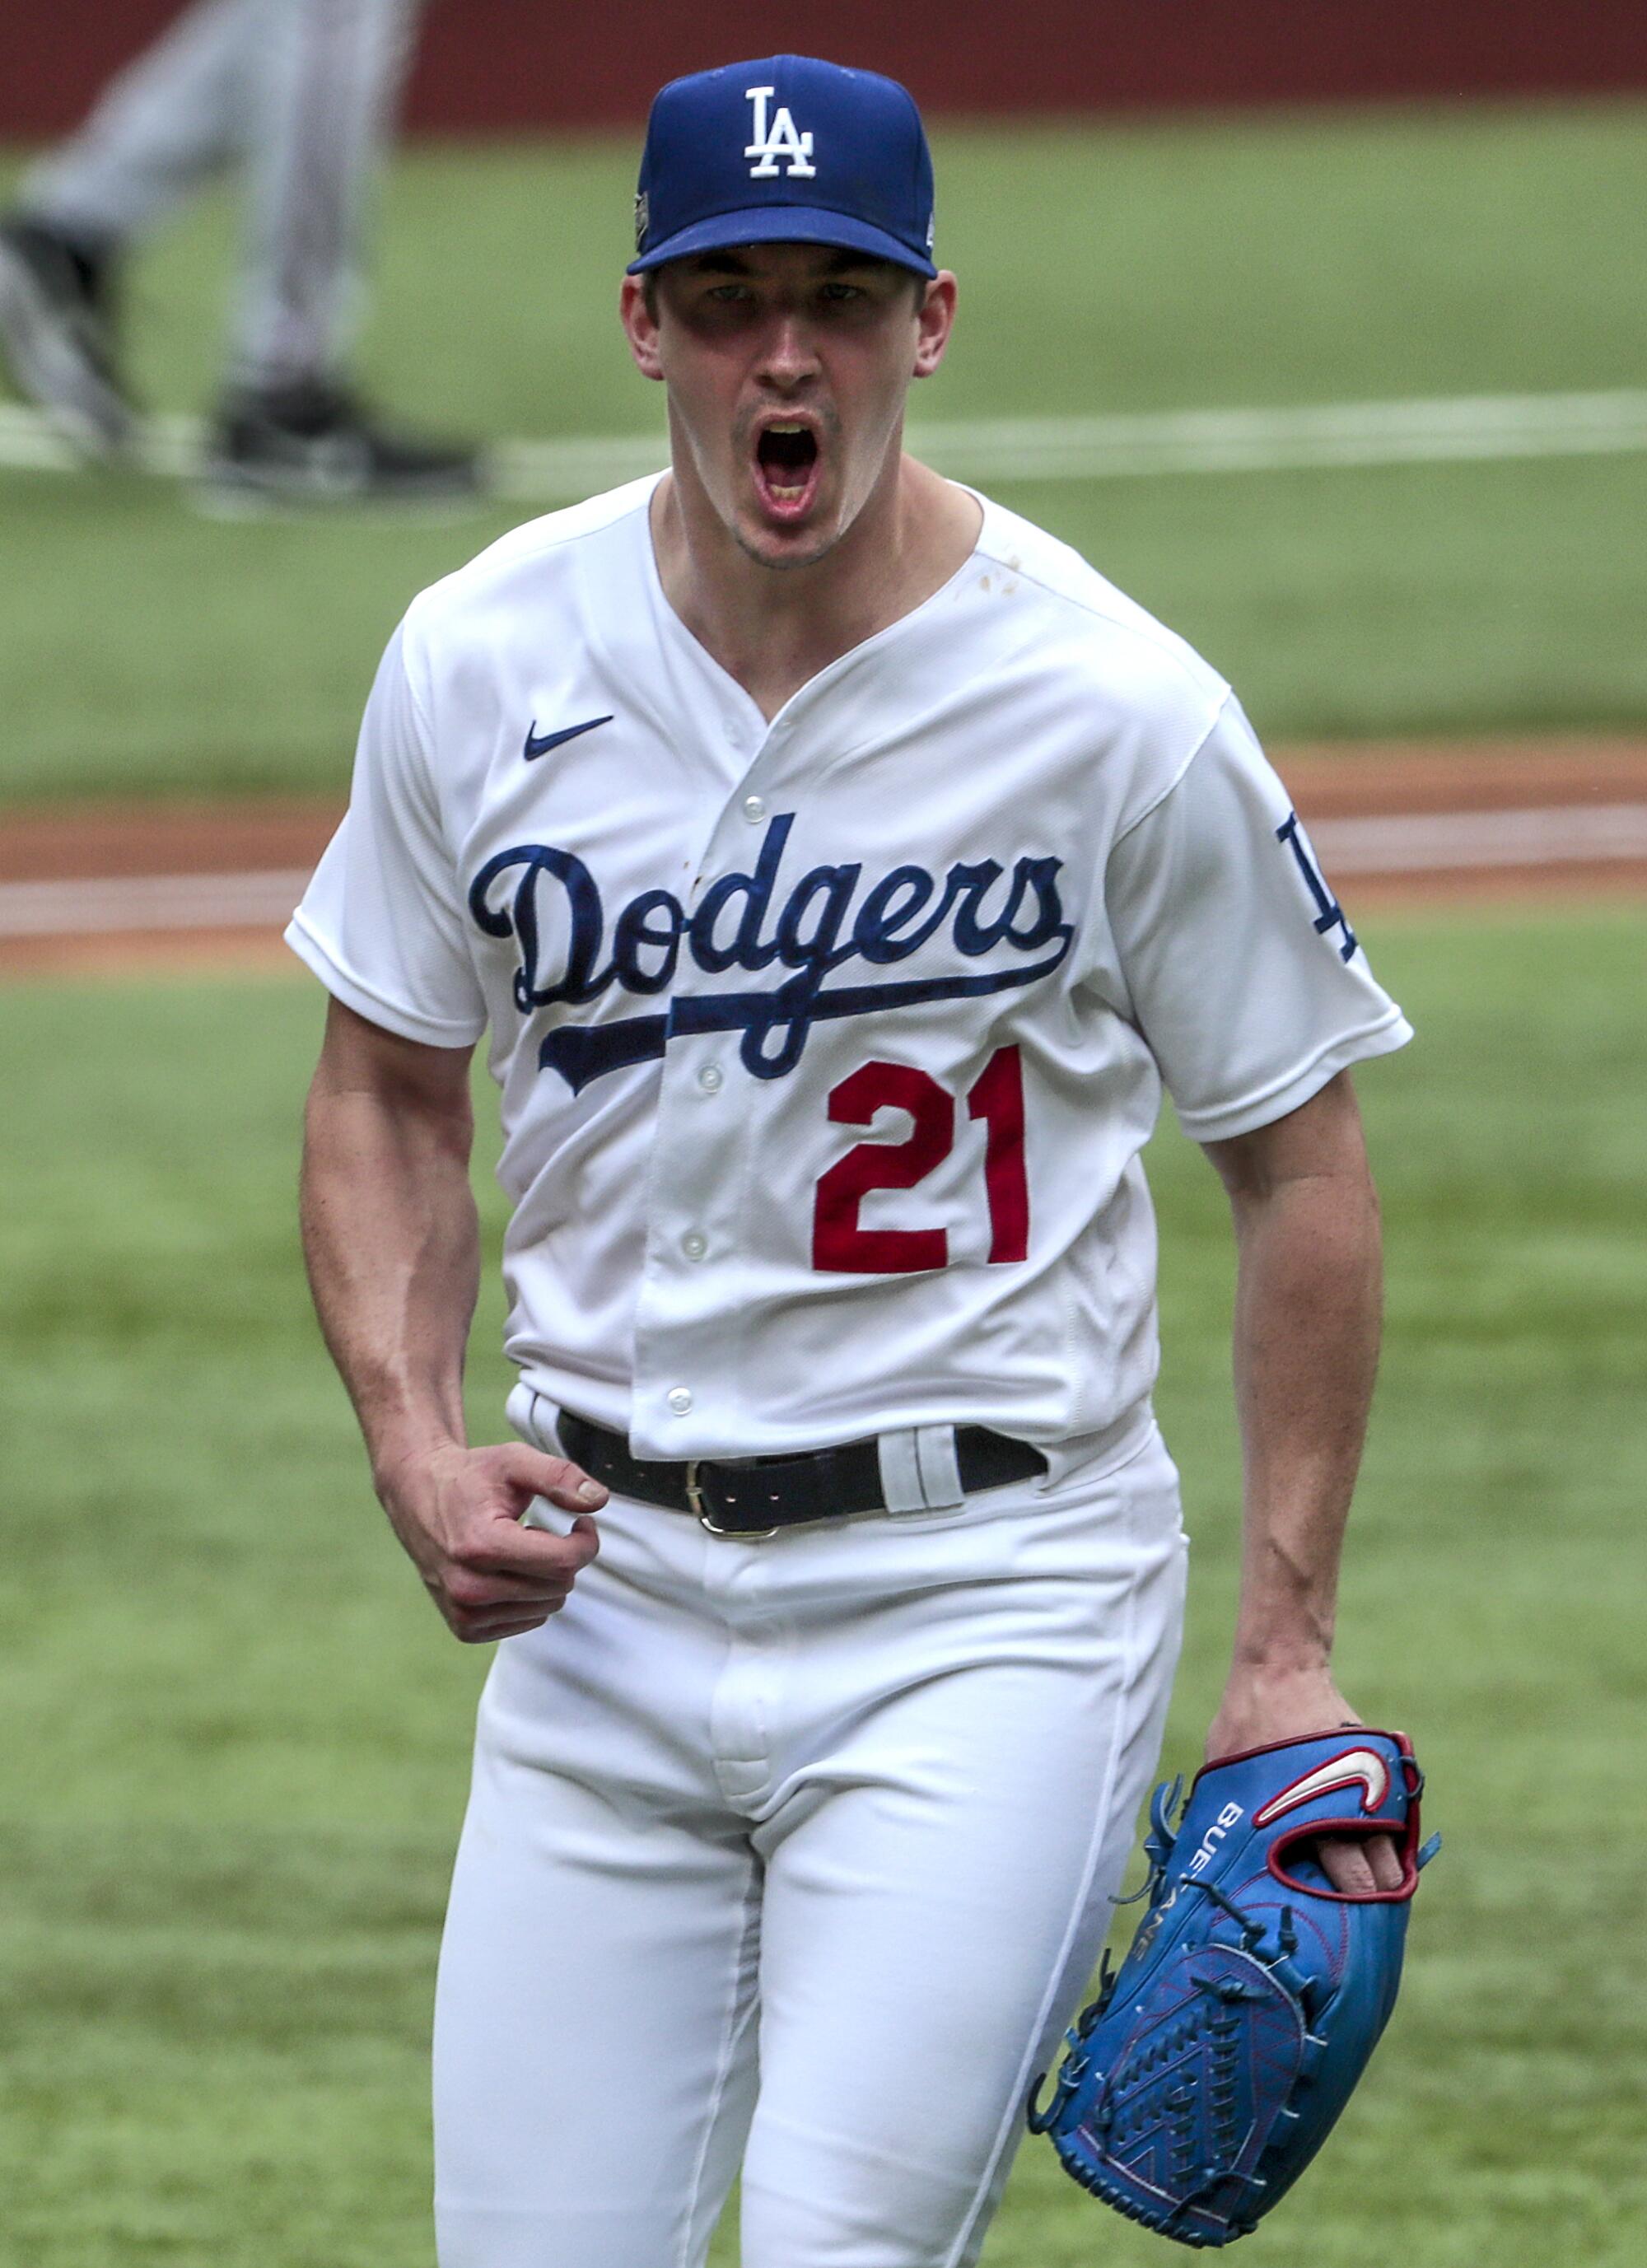 Dodgers starting pitcher Walker Buehler celebrates after getting out of a bases-loaded jam in the second inning.